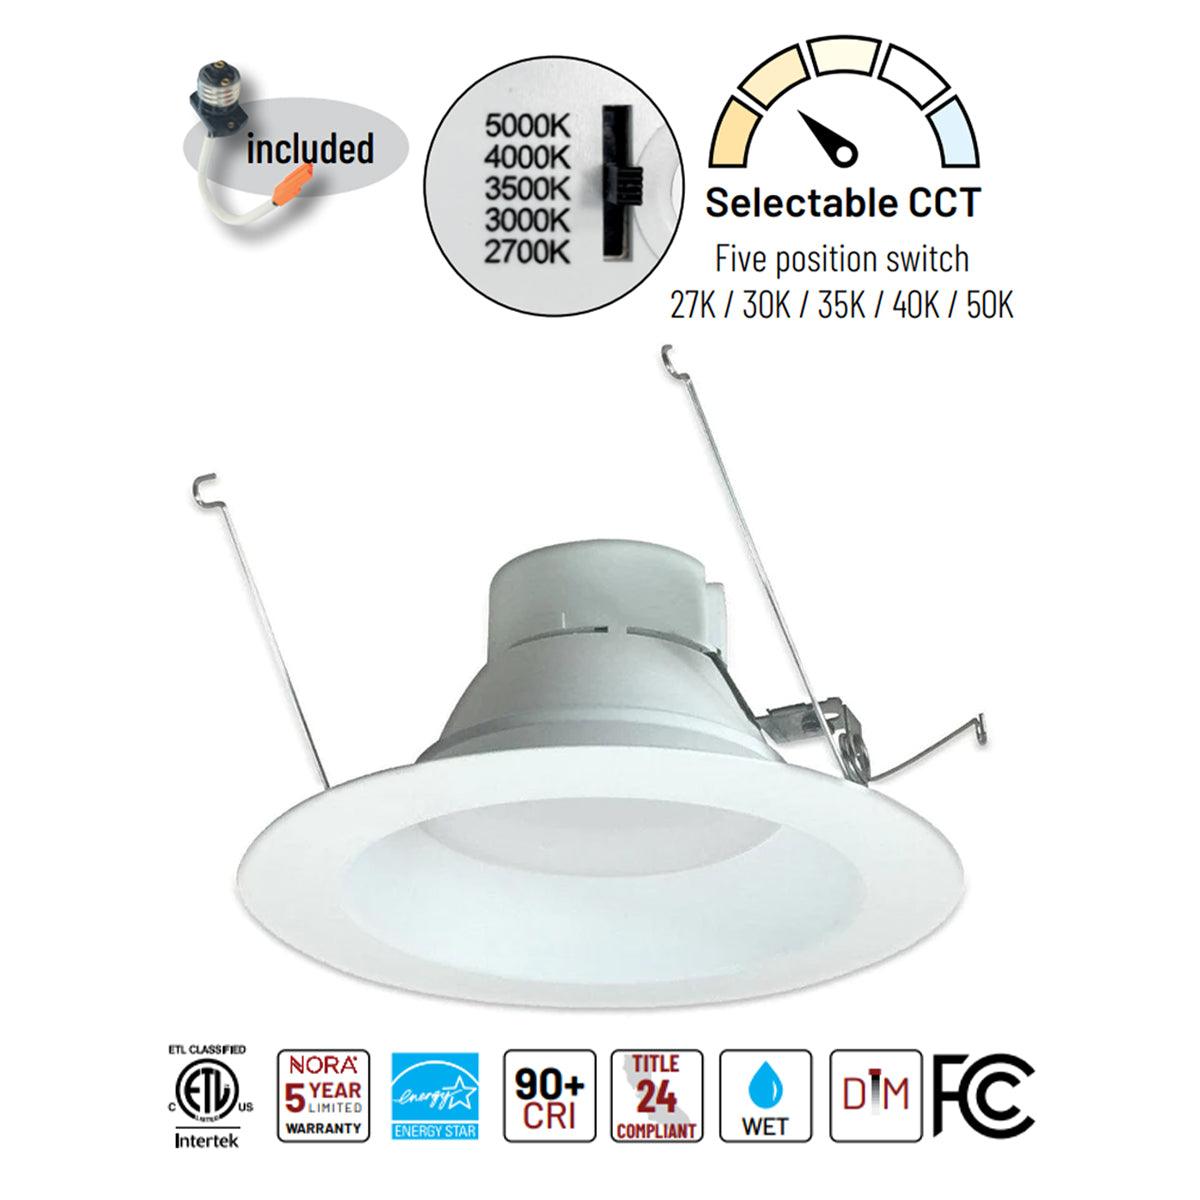 Onyx Recessed LED Can Light, 6 Inch, 15 Watt, 1100 Lumens, Tunable White, 2700K to 5000K, Reflector Trim - Bees Lighting